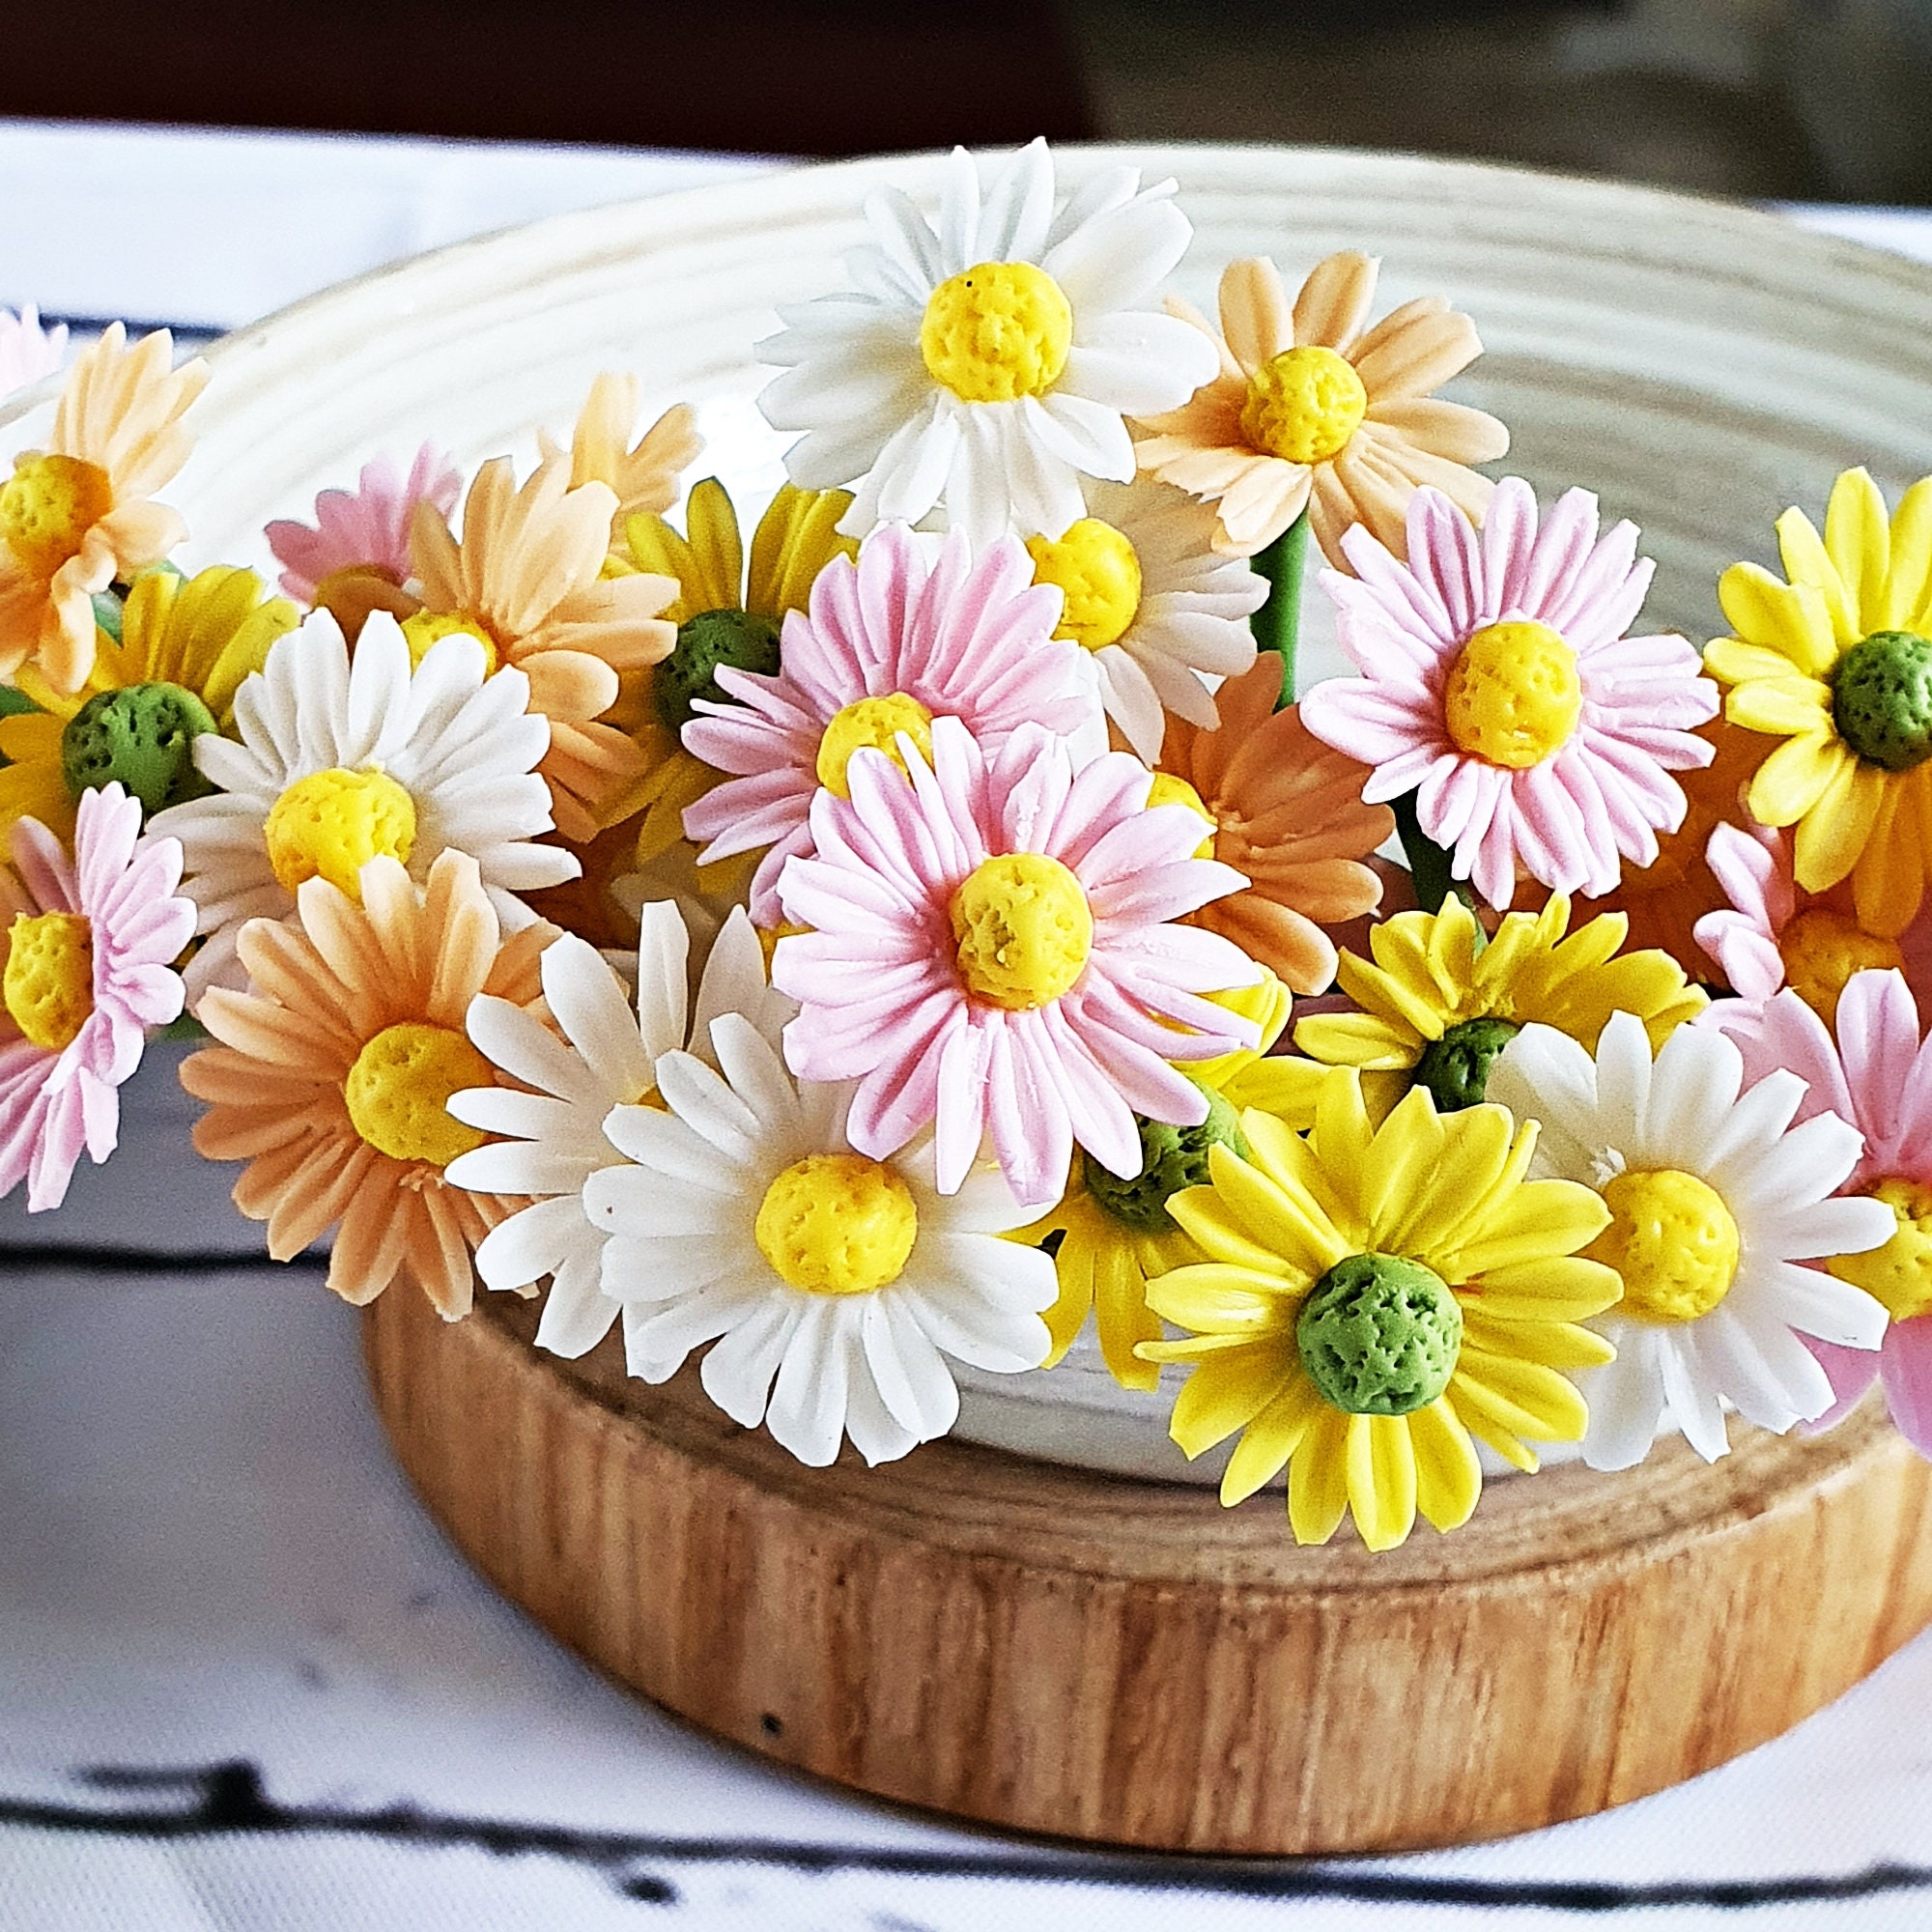 Flower Spring Flowers Daisies Mix Daisy Fimo Slices Fake Sprinkles